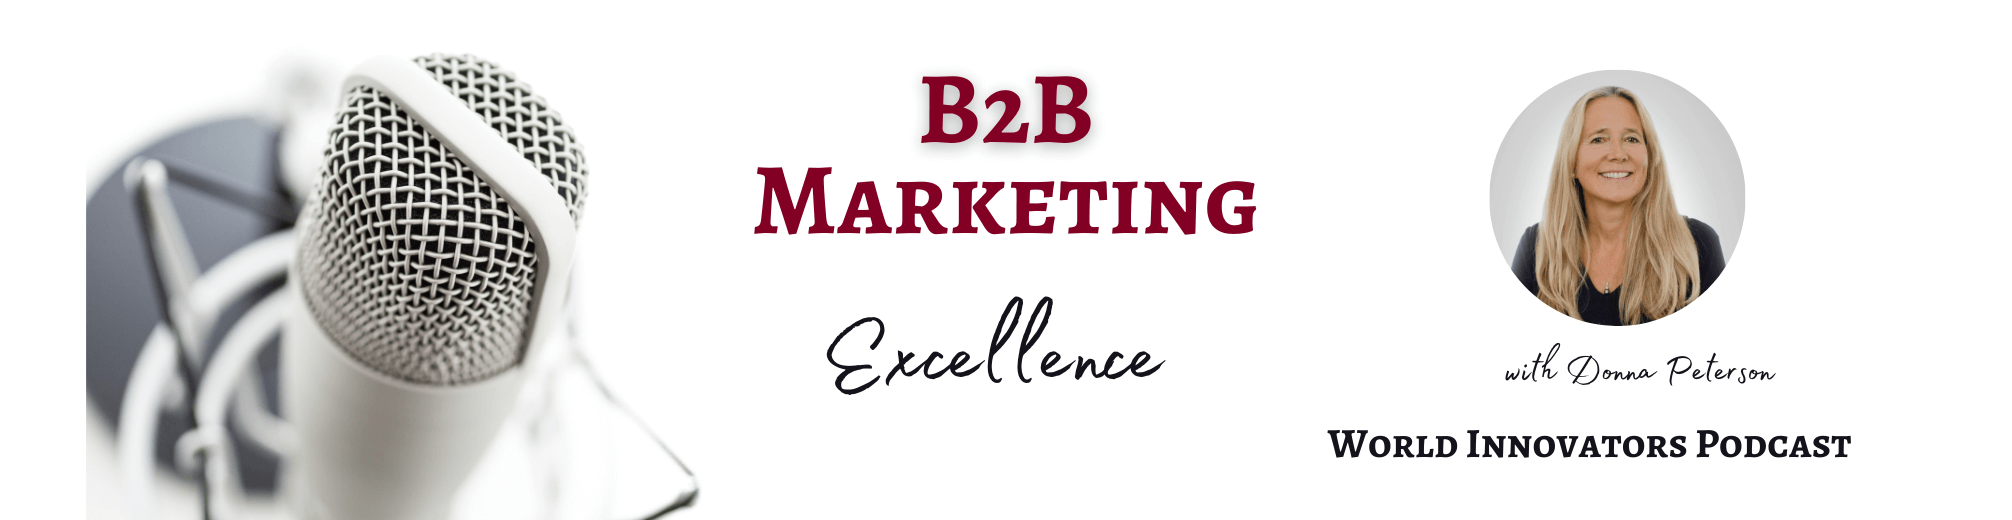 B2B Marketing Excellence Podcast